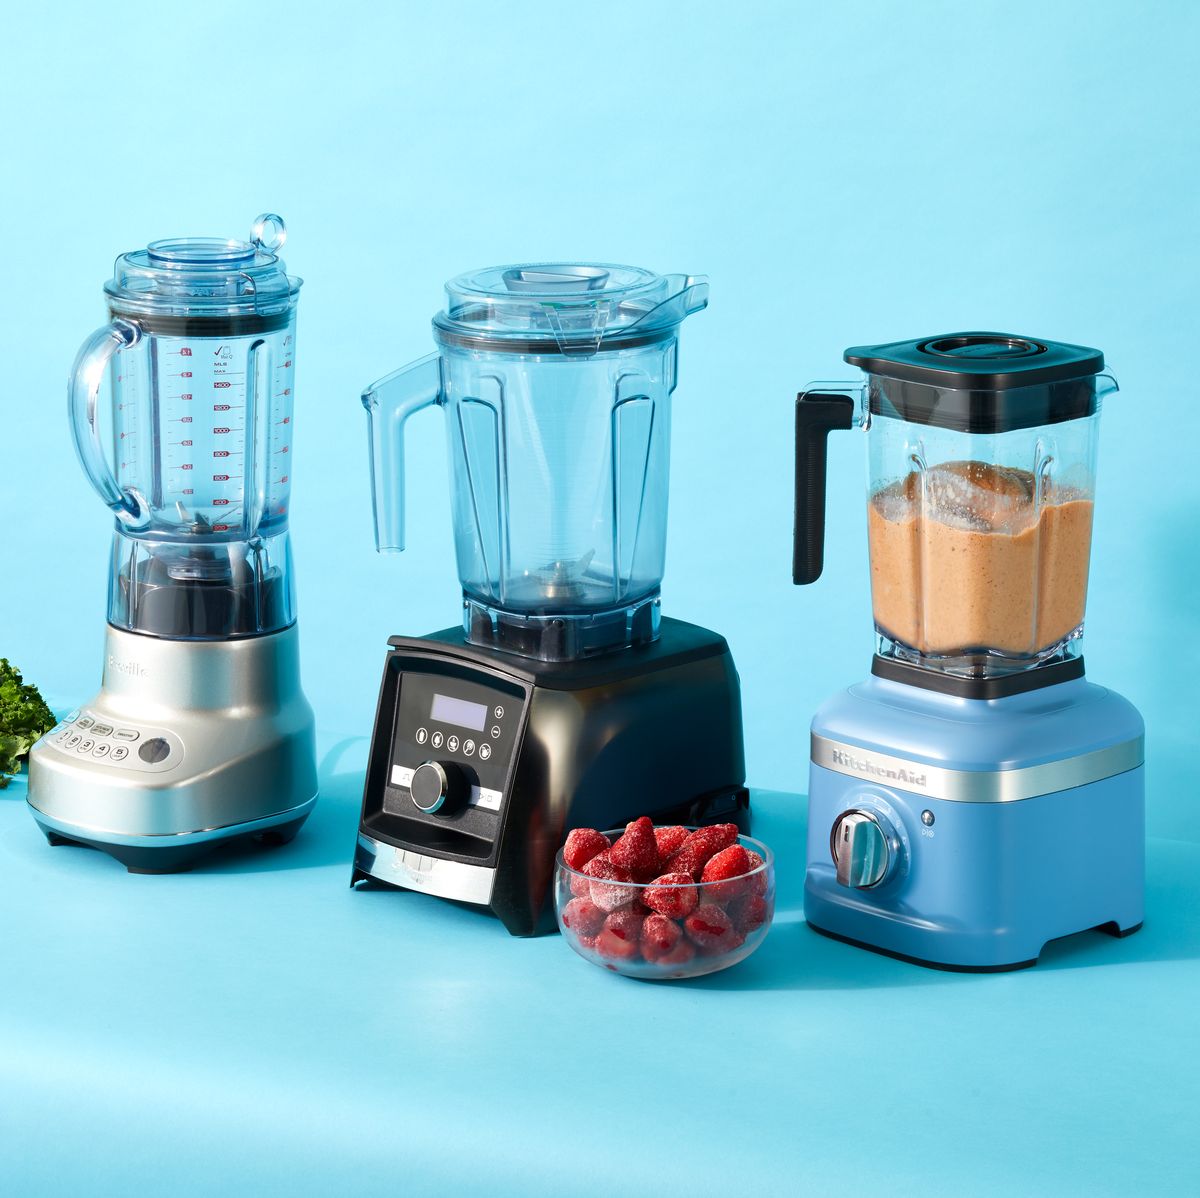 Best blenders: 6 top tried and tested models to buy in 2023